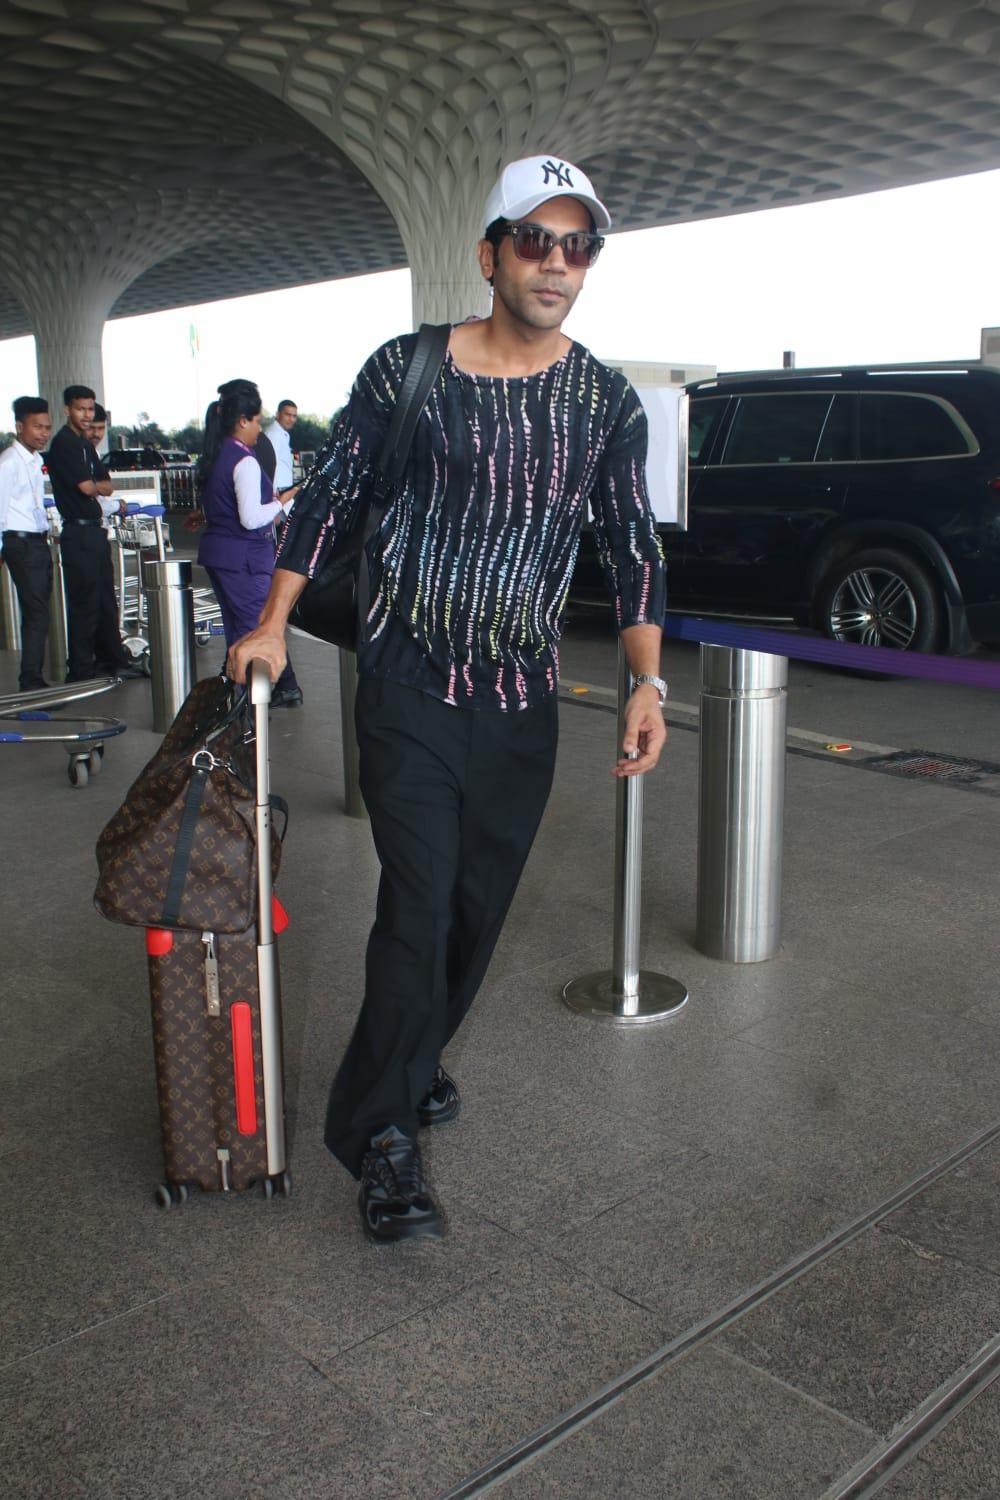 Rajkummar Rao was also clicked at the airport, with his wife Patralekhaa